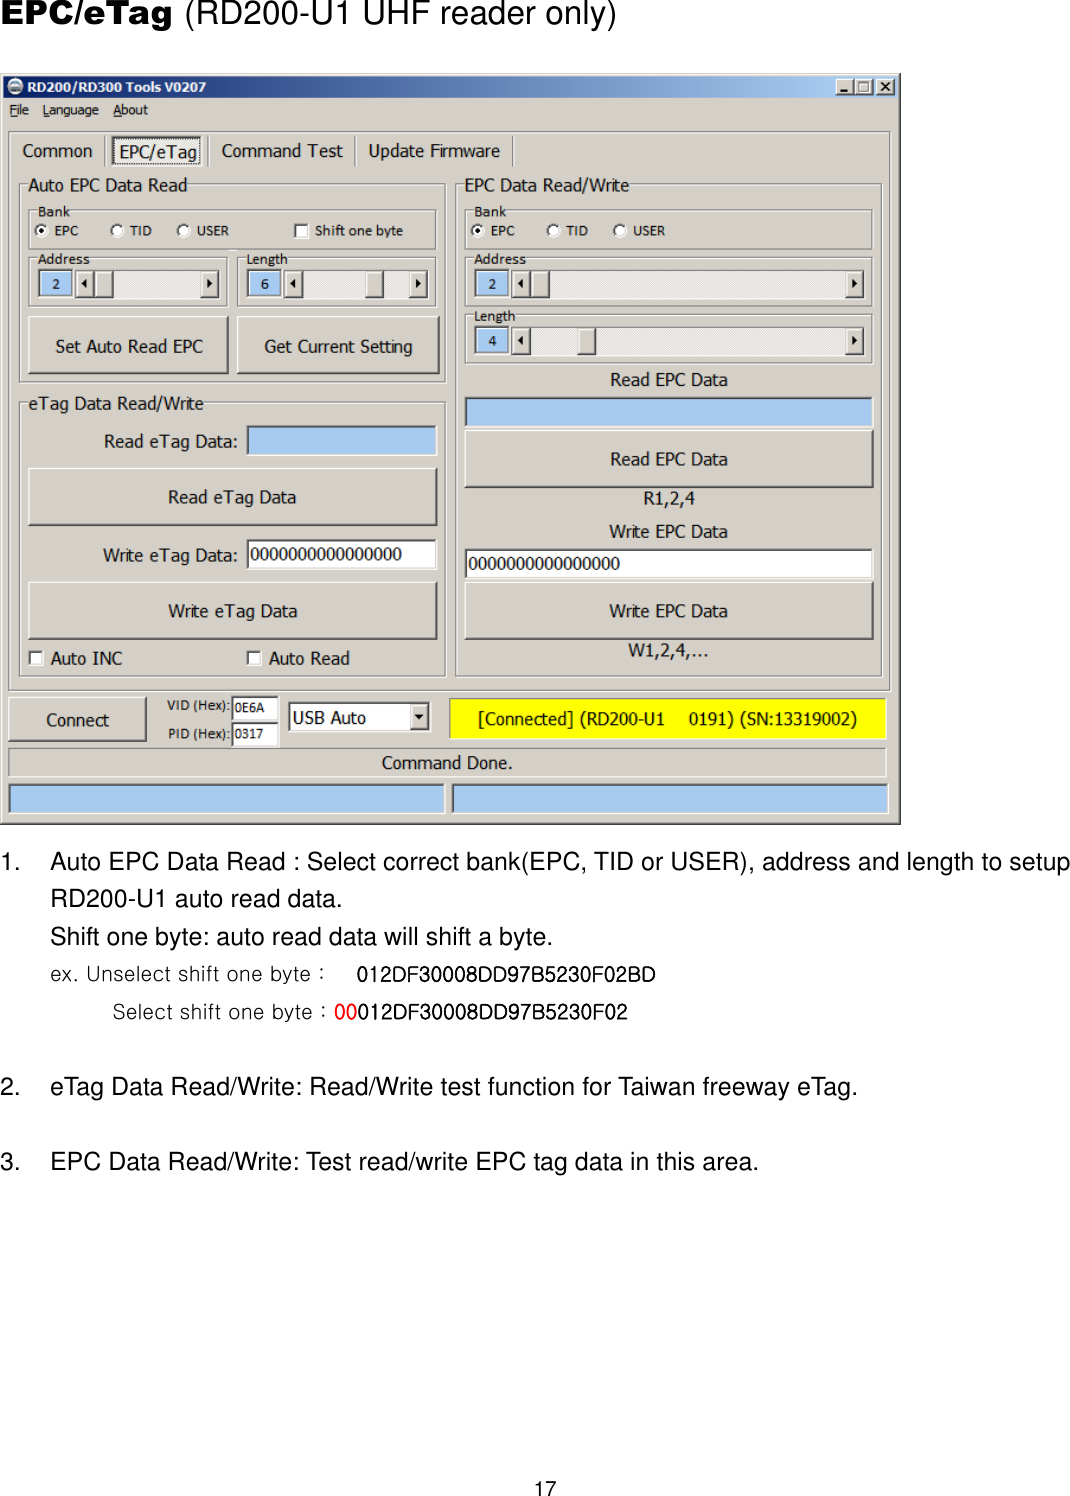 17  EPC/eTag (RD200-U1 UHF reader only)  1.  Auto EPC Data Read : Select correct bank(EPC, TID or USER), address and length to setup RD200-U1 auto read data. Shift one byte: auto read data will shift a byte. ex. Unselect shift one byte :      012DF30008DD97B5230F02BD             Select shift one byte : 00012DF30008DD97B5230F02  2.  eTag Data Read/Write: Read/Write test function for Taiwan freeway eTag.  3.  EPC Data Read/Write: Test read/write EPC tag data in this area. 